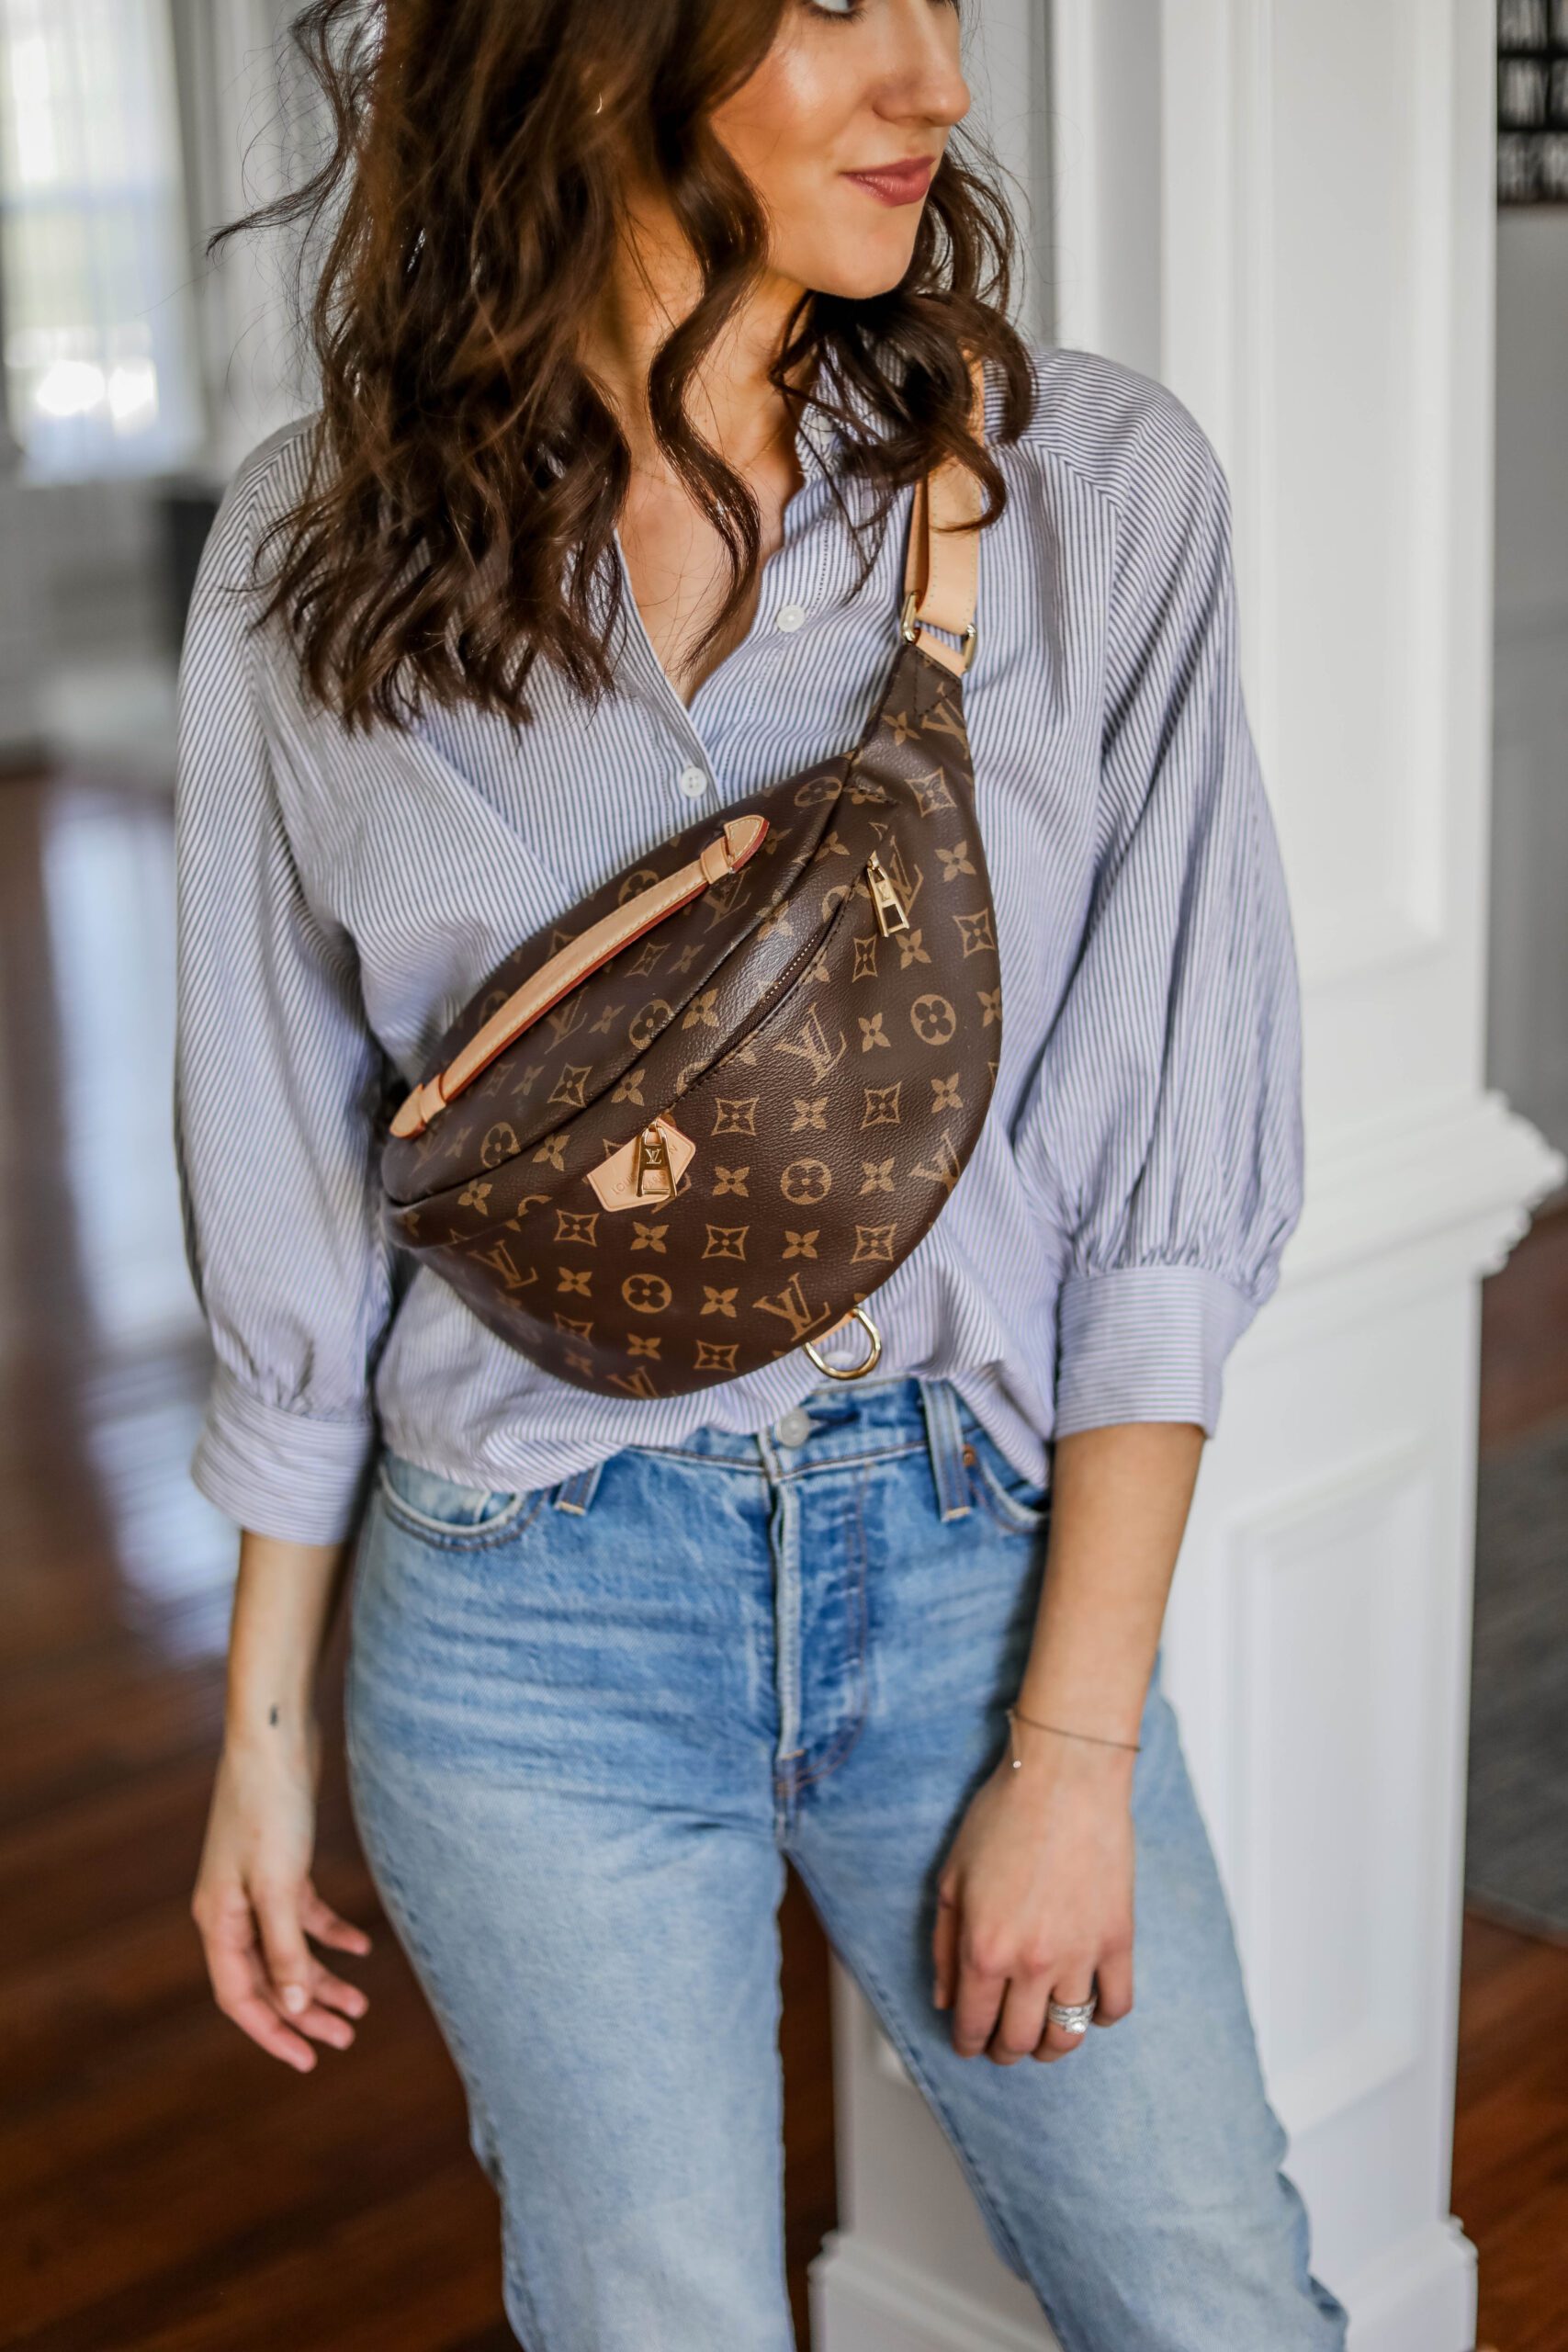 The Vuitton Bags for - My 3 Personal Favorites